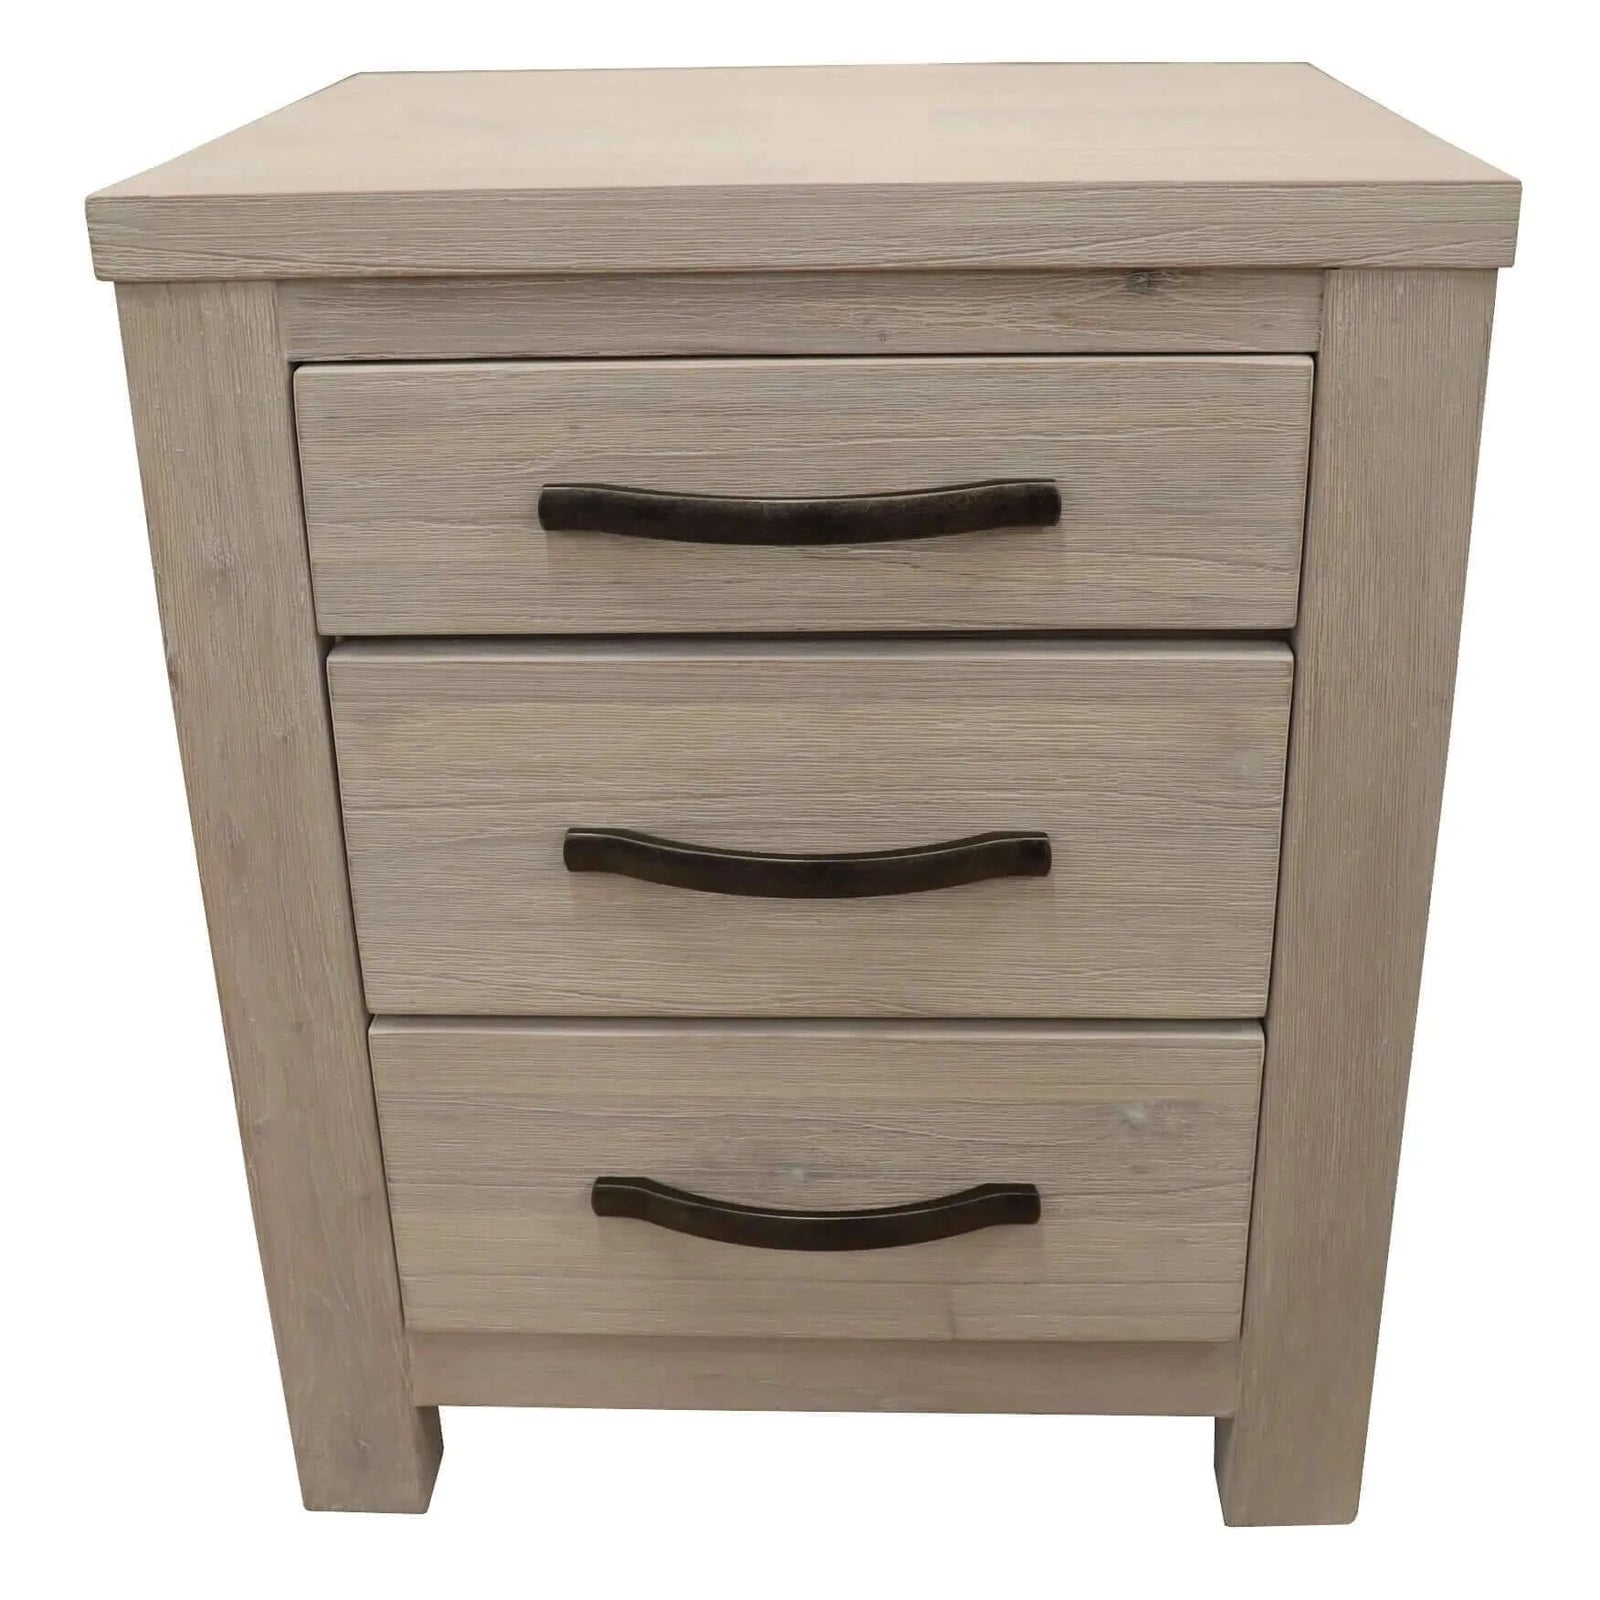 Buy foxglove bedside tables 3 drawers storage cabinet shelf side end table - white - upinteriors-Upinteriors